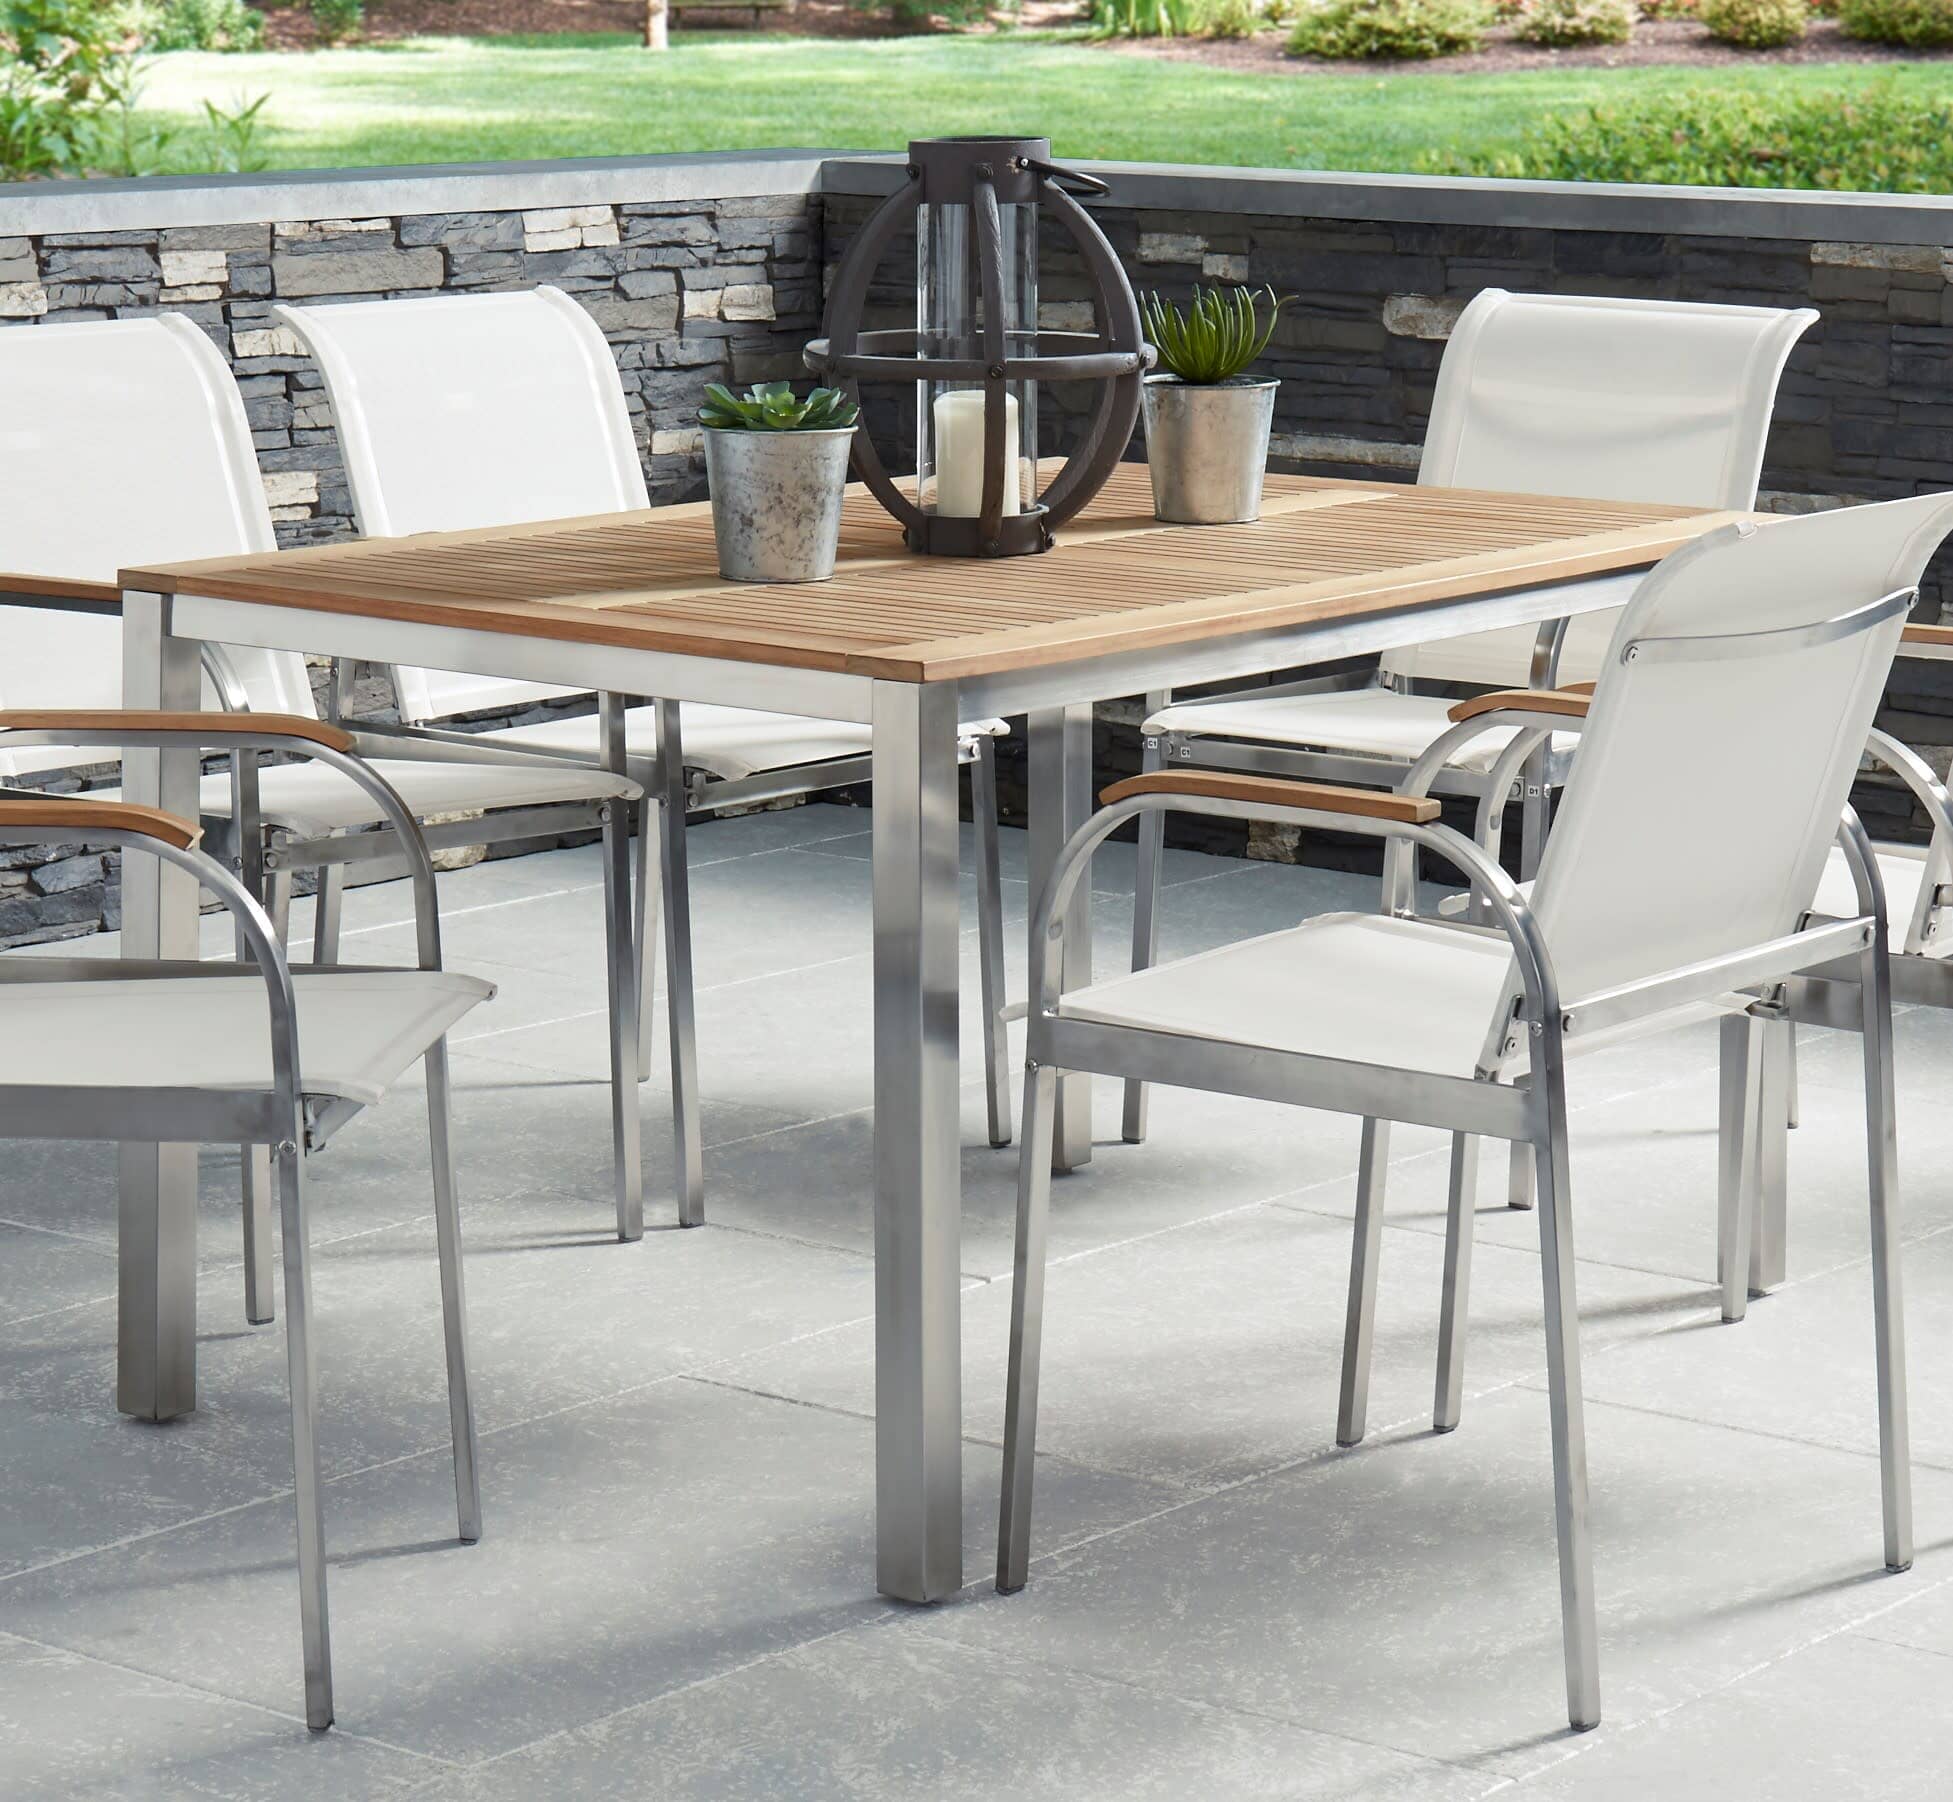 Traditional Outdoor Dining Table By Aruba Outdoor Dining Aruba